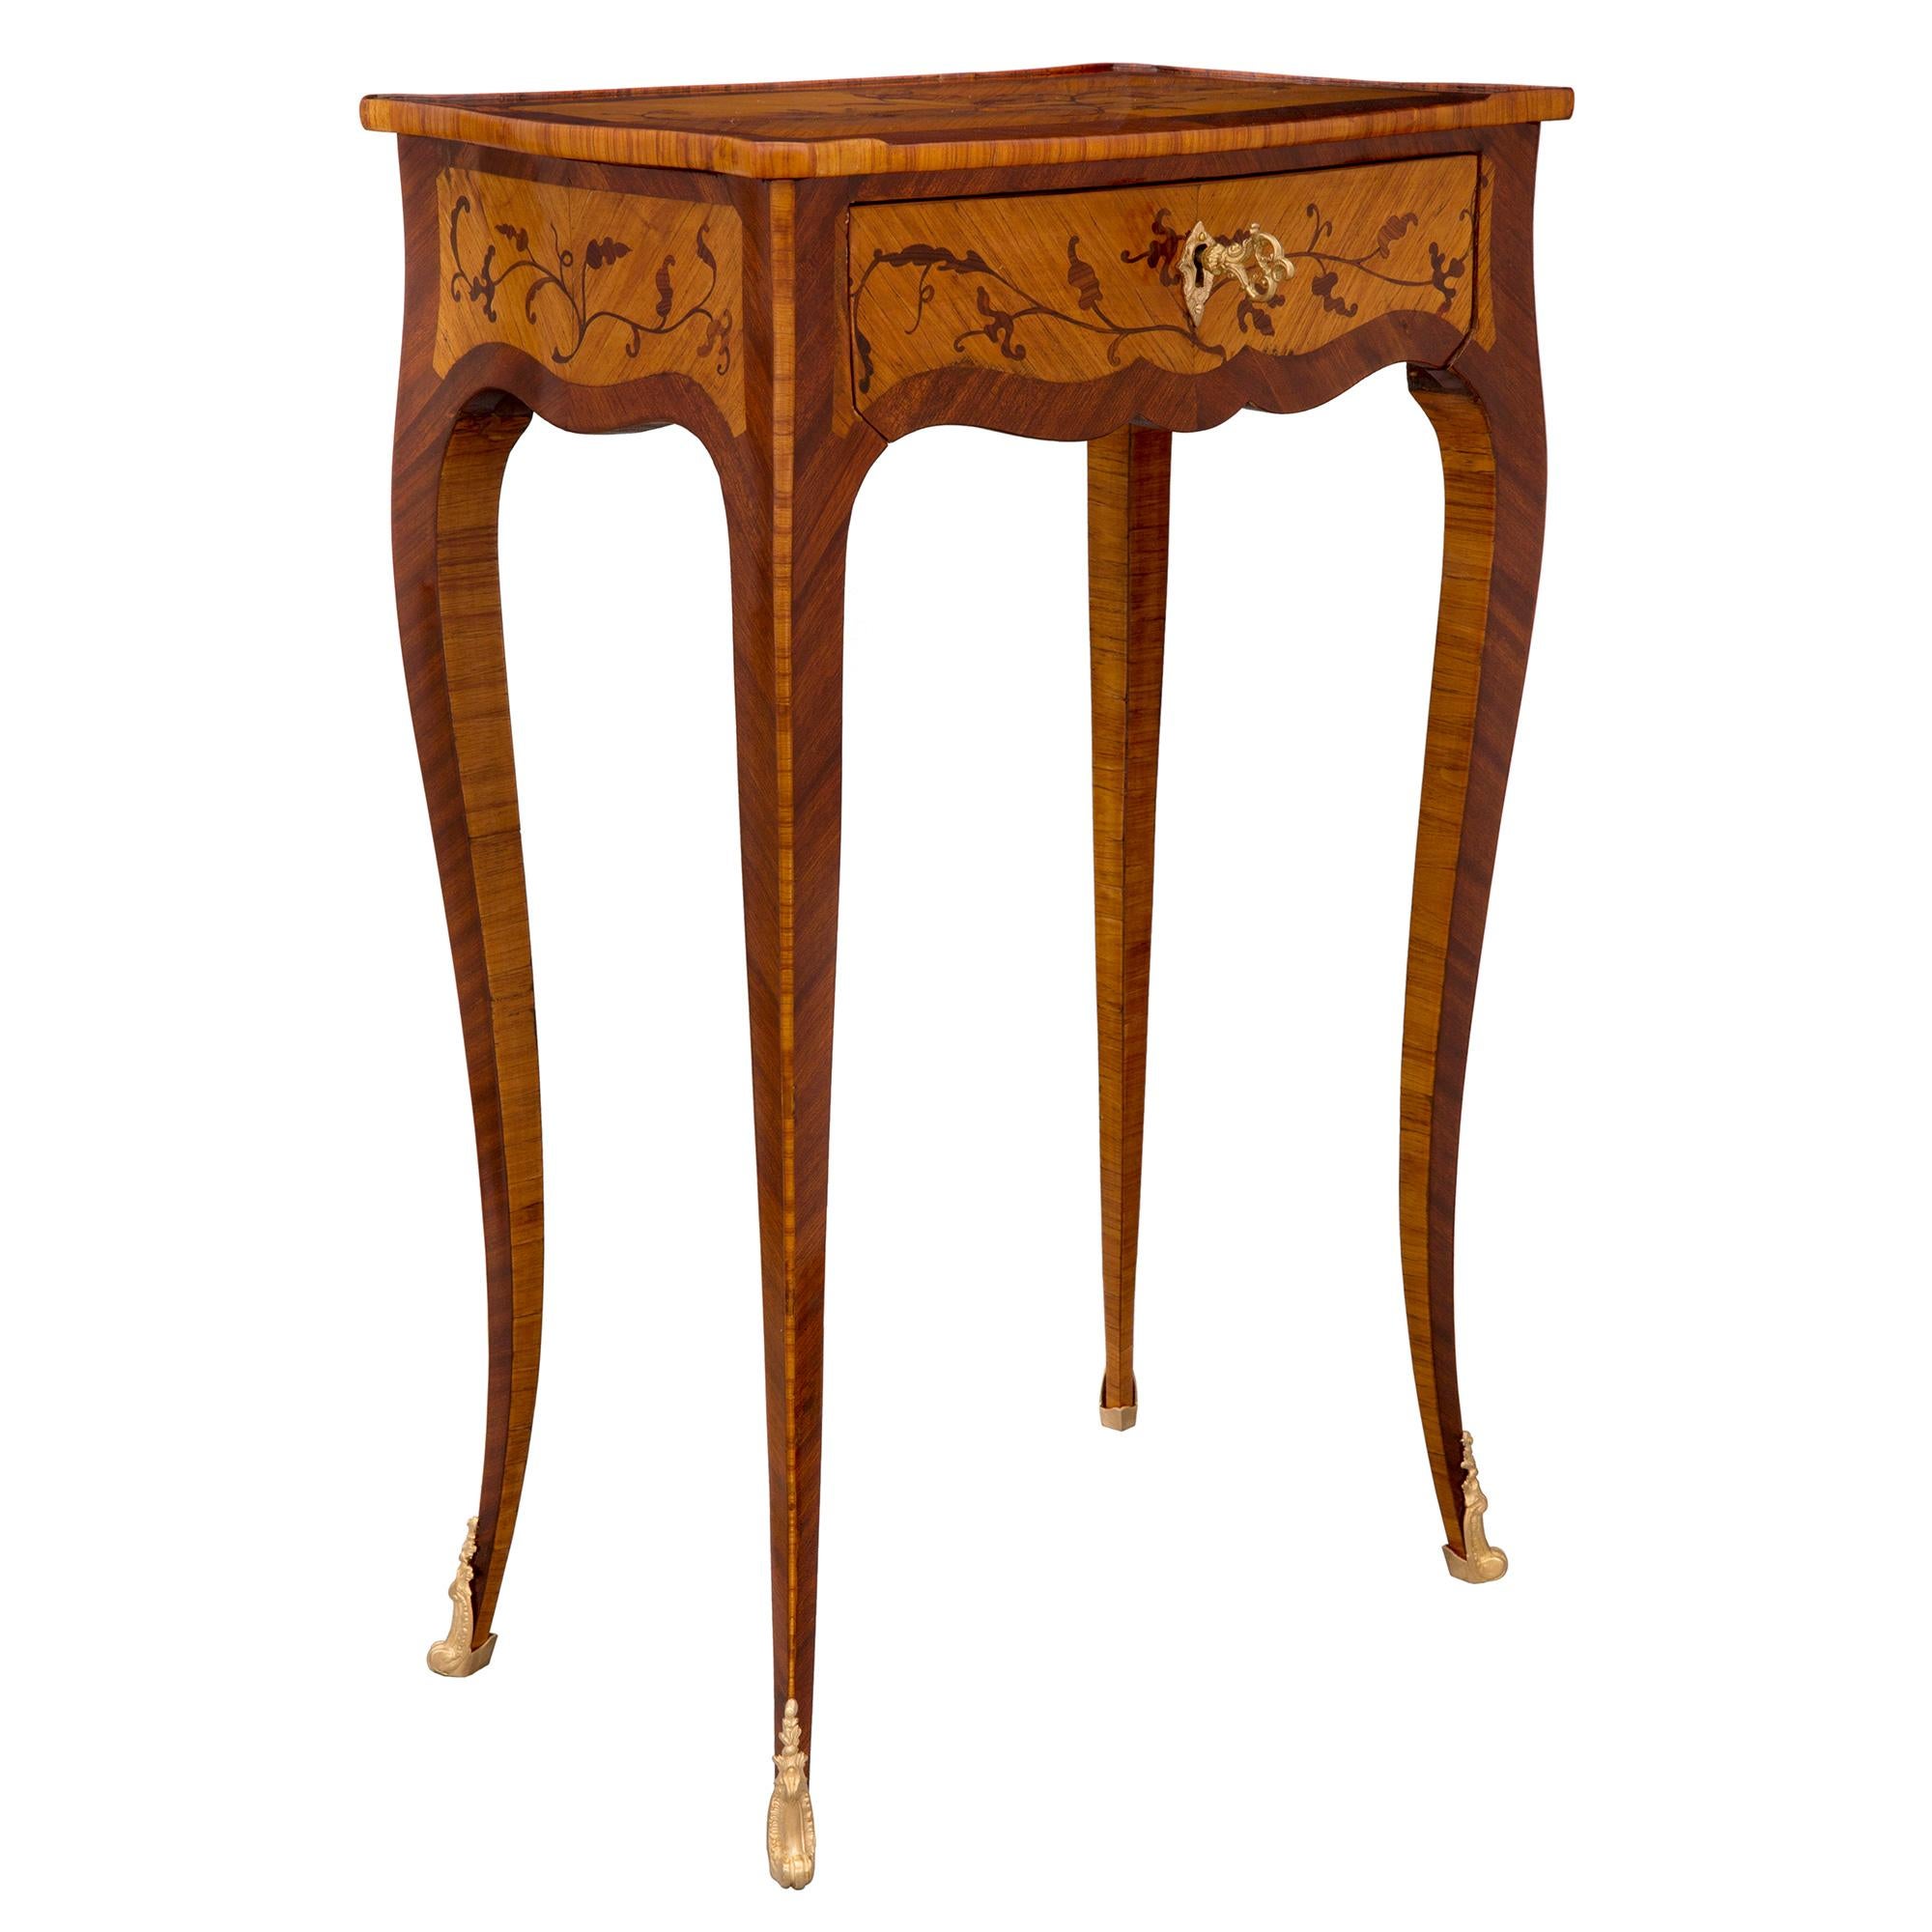 French 19th Century Louis XV Style Kingwood, Tulipwood and Ormolu Side Table In Good Condition For Sale In West Palm Beach, FL